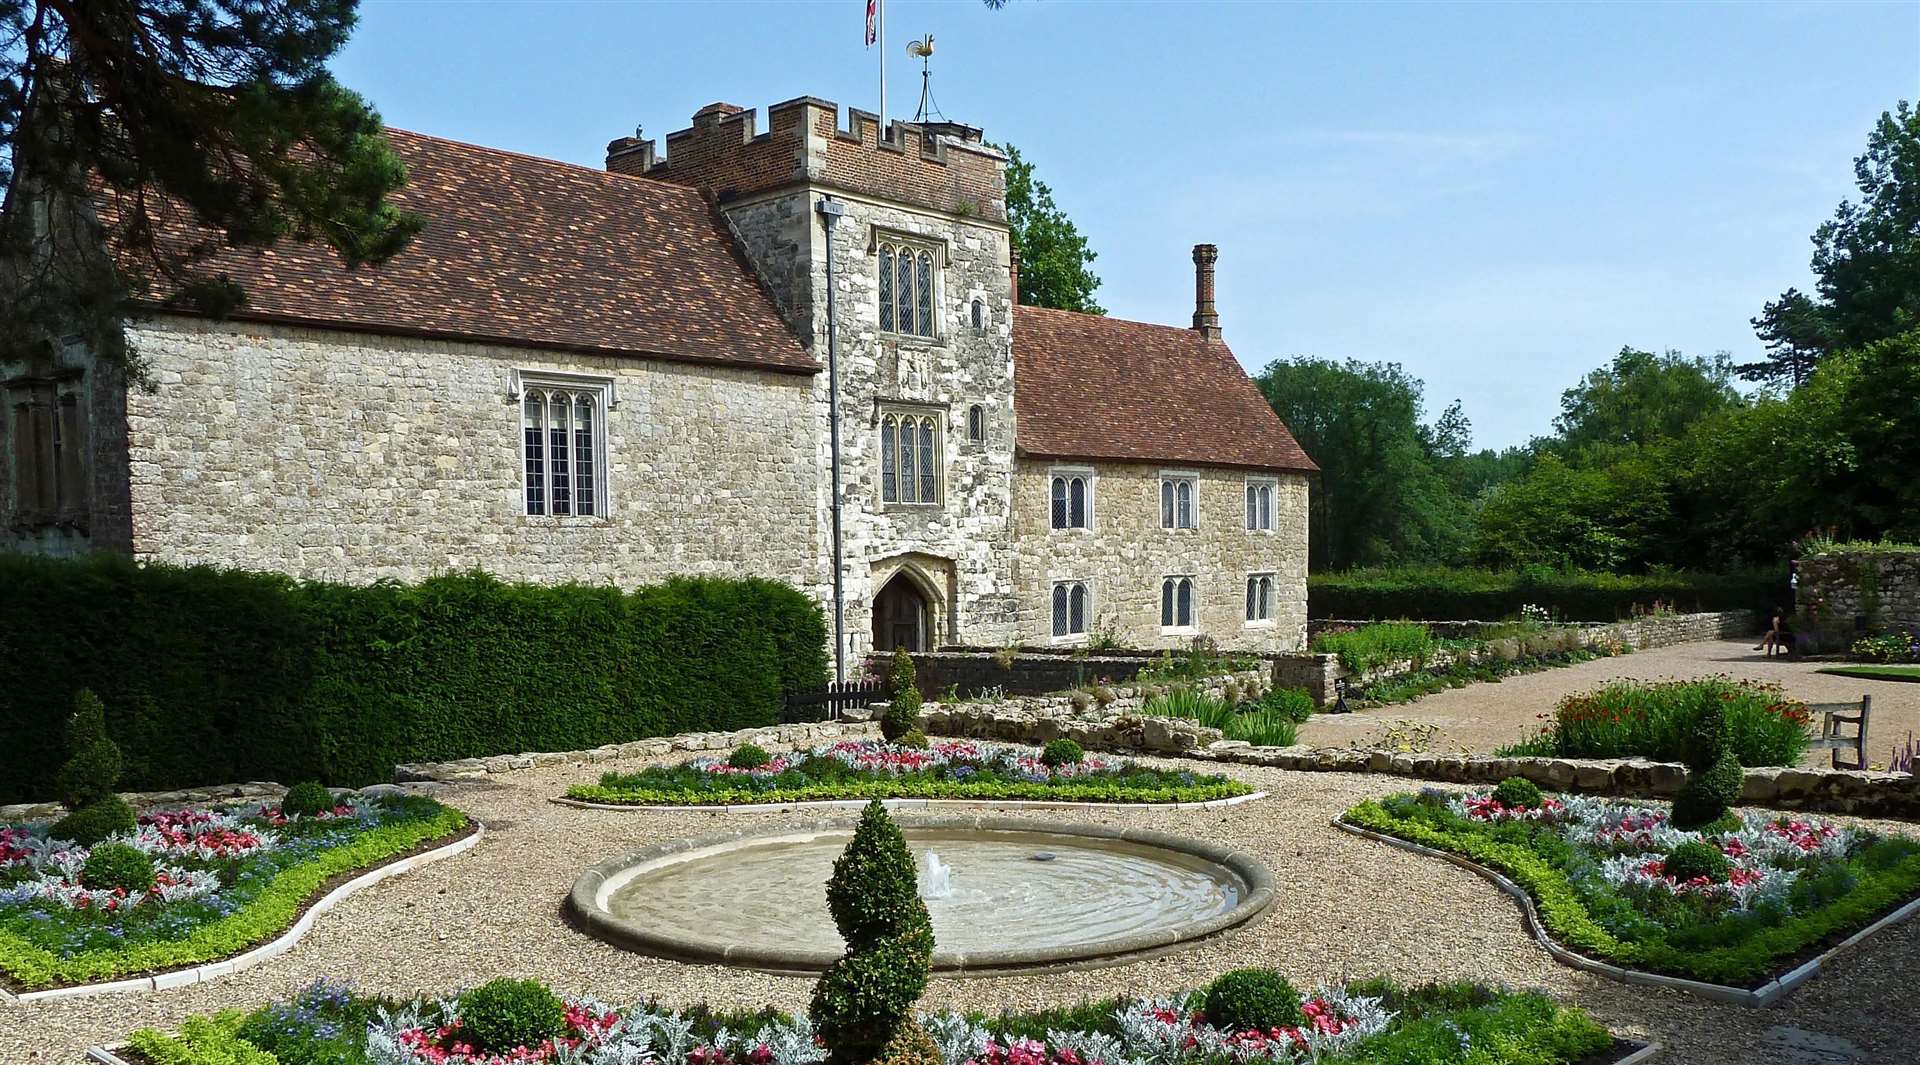 Plans to build a car park on a field at Ightham Mote are back on the cards